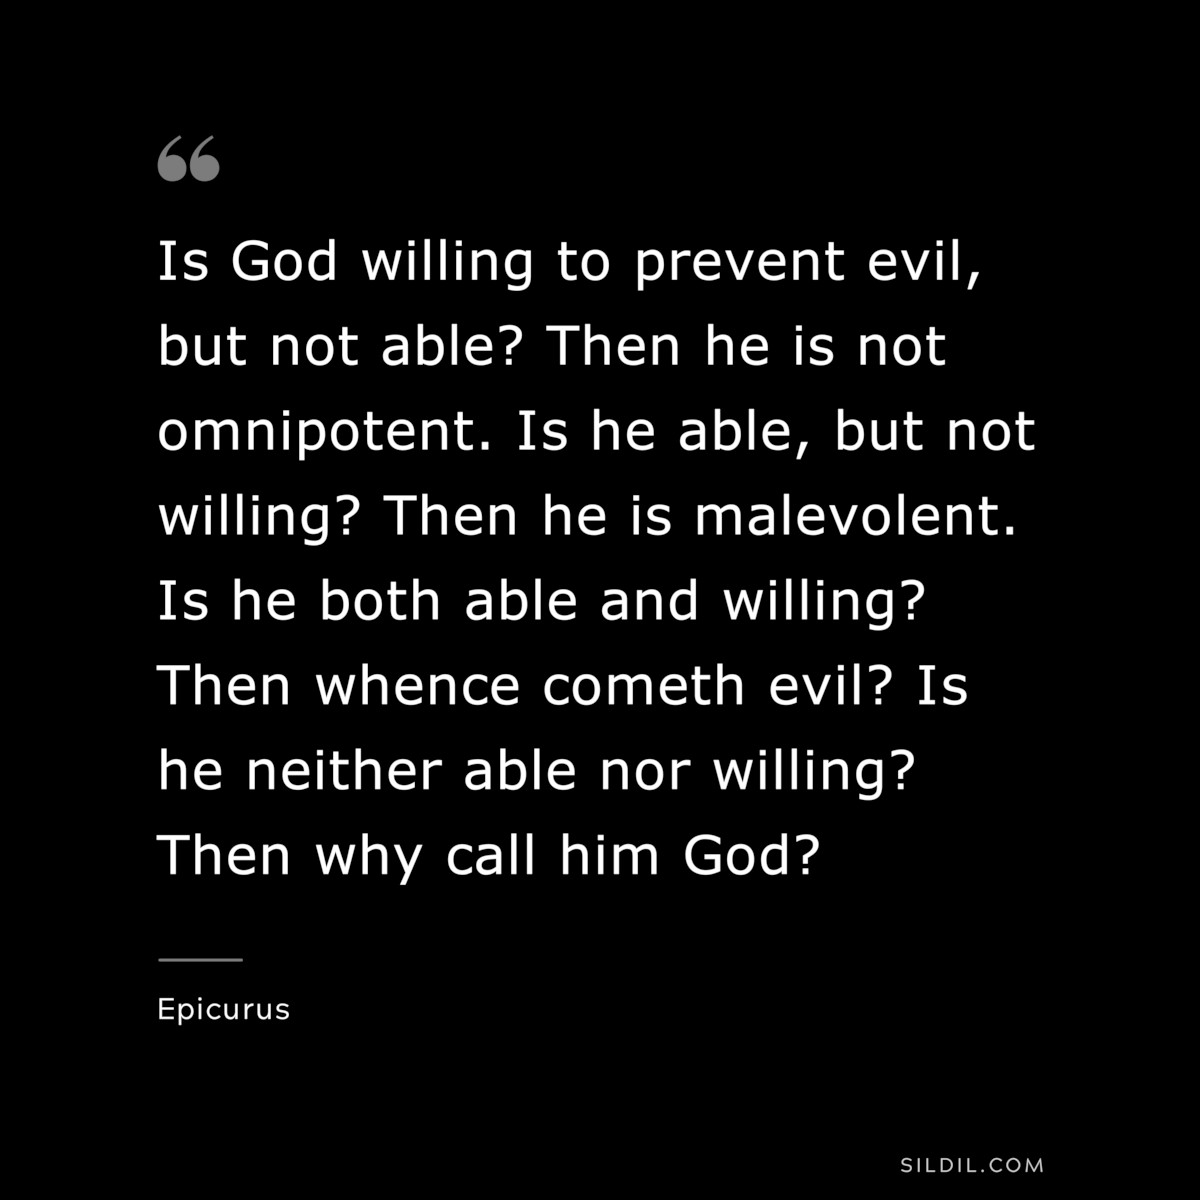 Is God willing to prevent evil, but not able? Then he is not omnipotent. Is he able, but not willing? Then he is malevolent. Is he both able and willing? Then whence cometh evil? Is he neither able nor willing? Then why call him God? — Epicurus